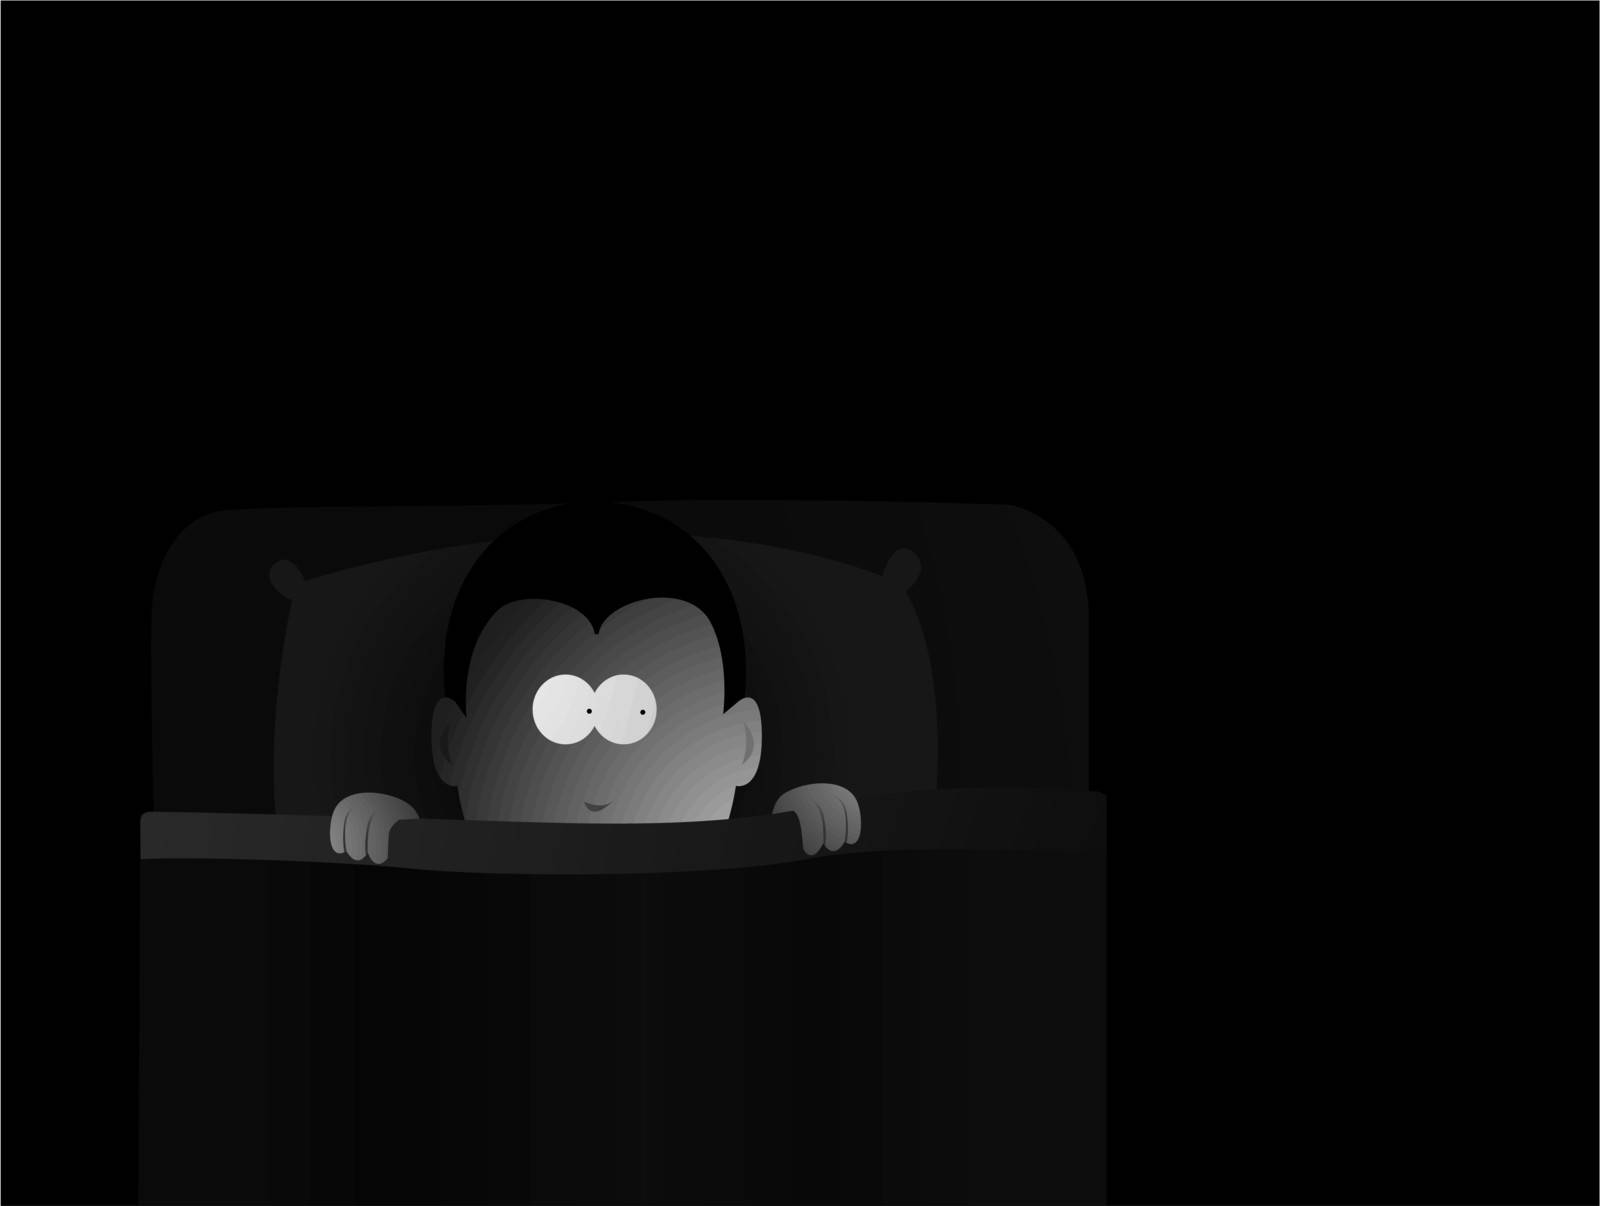 Kid in bed, afraid of the darkness by curvabezier